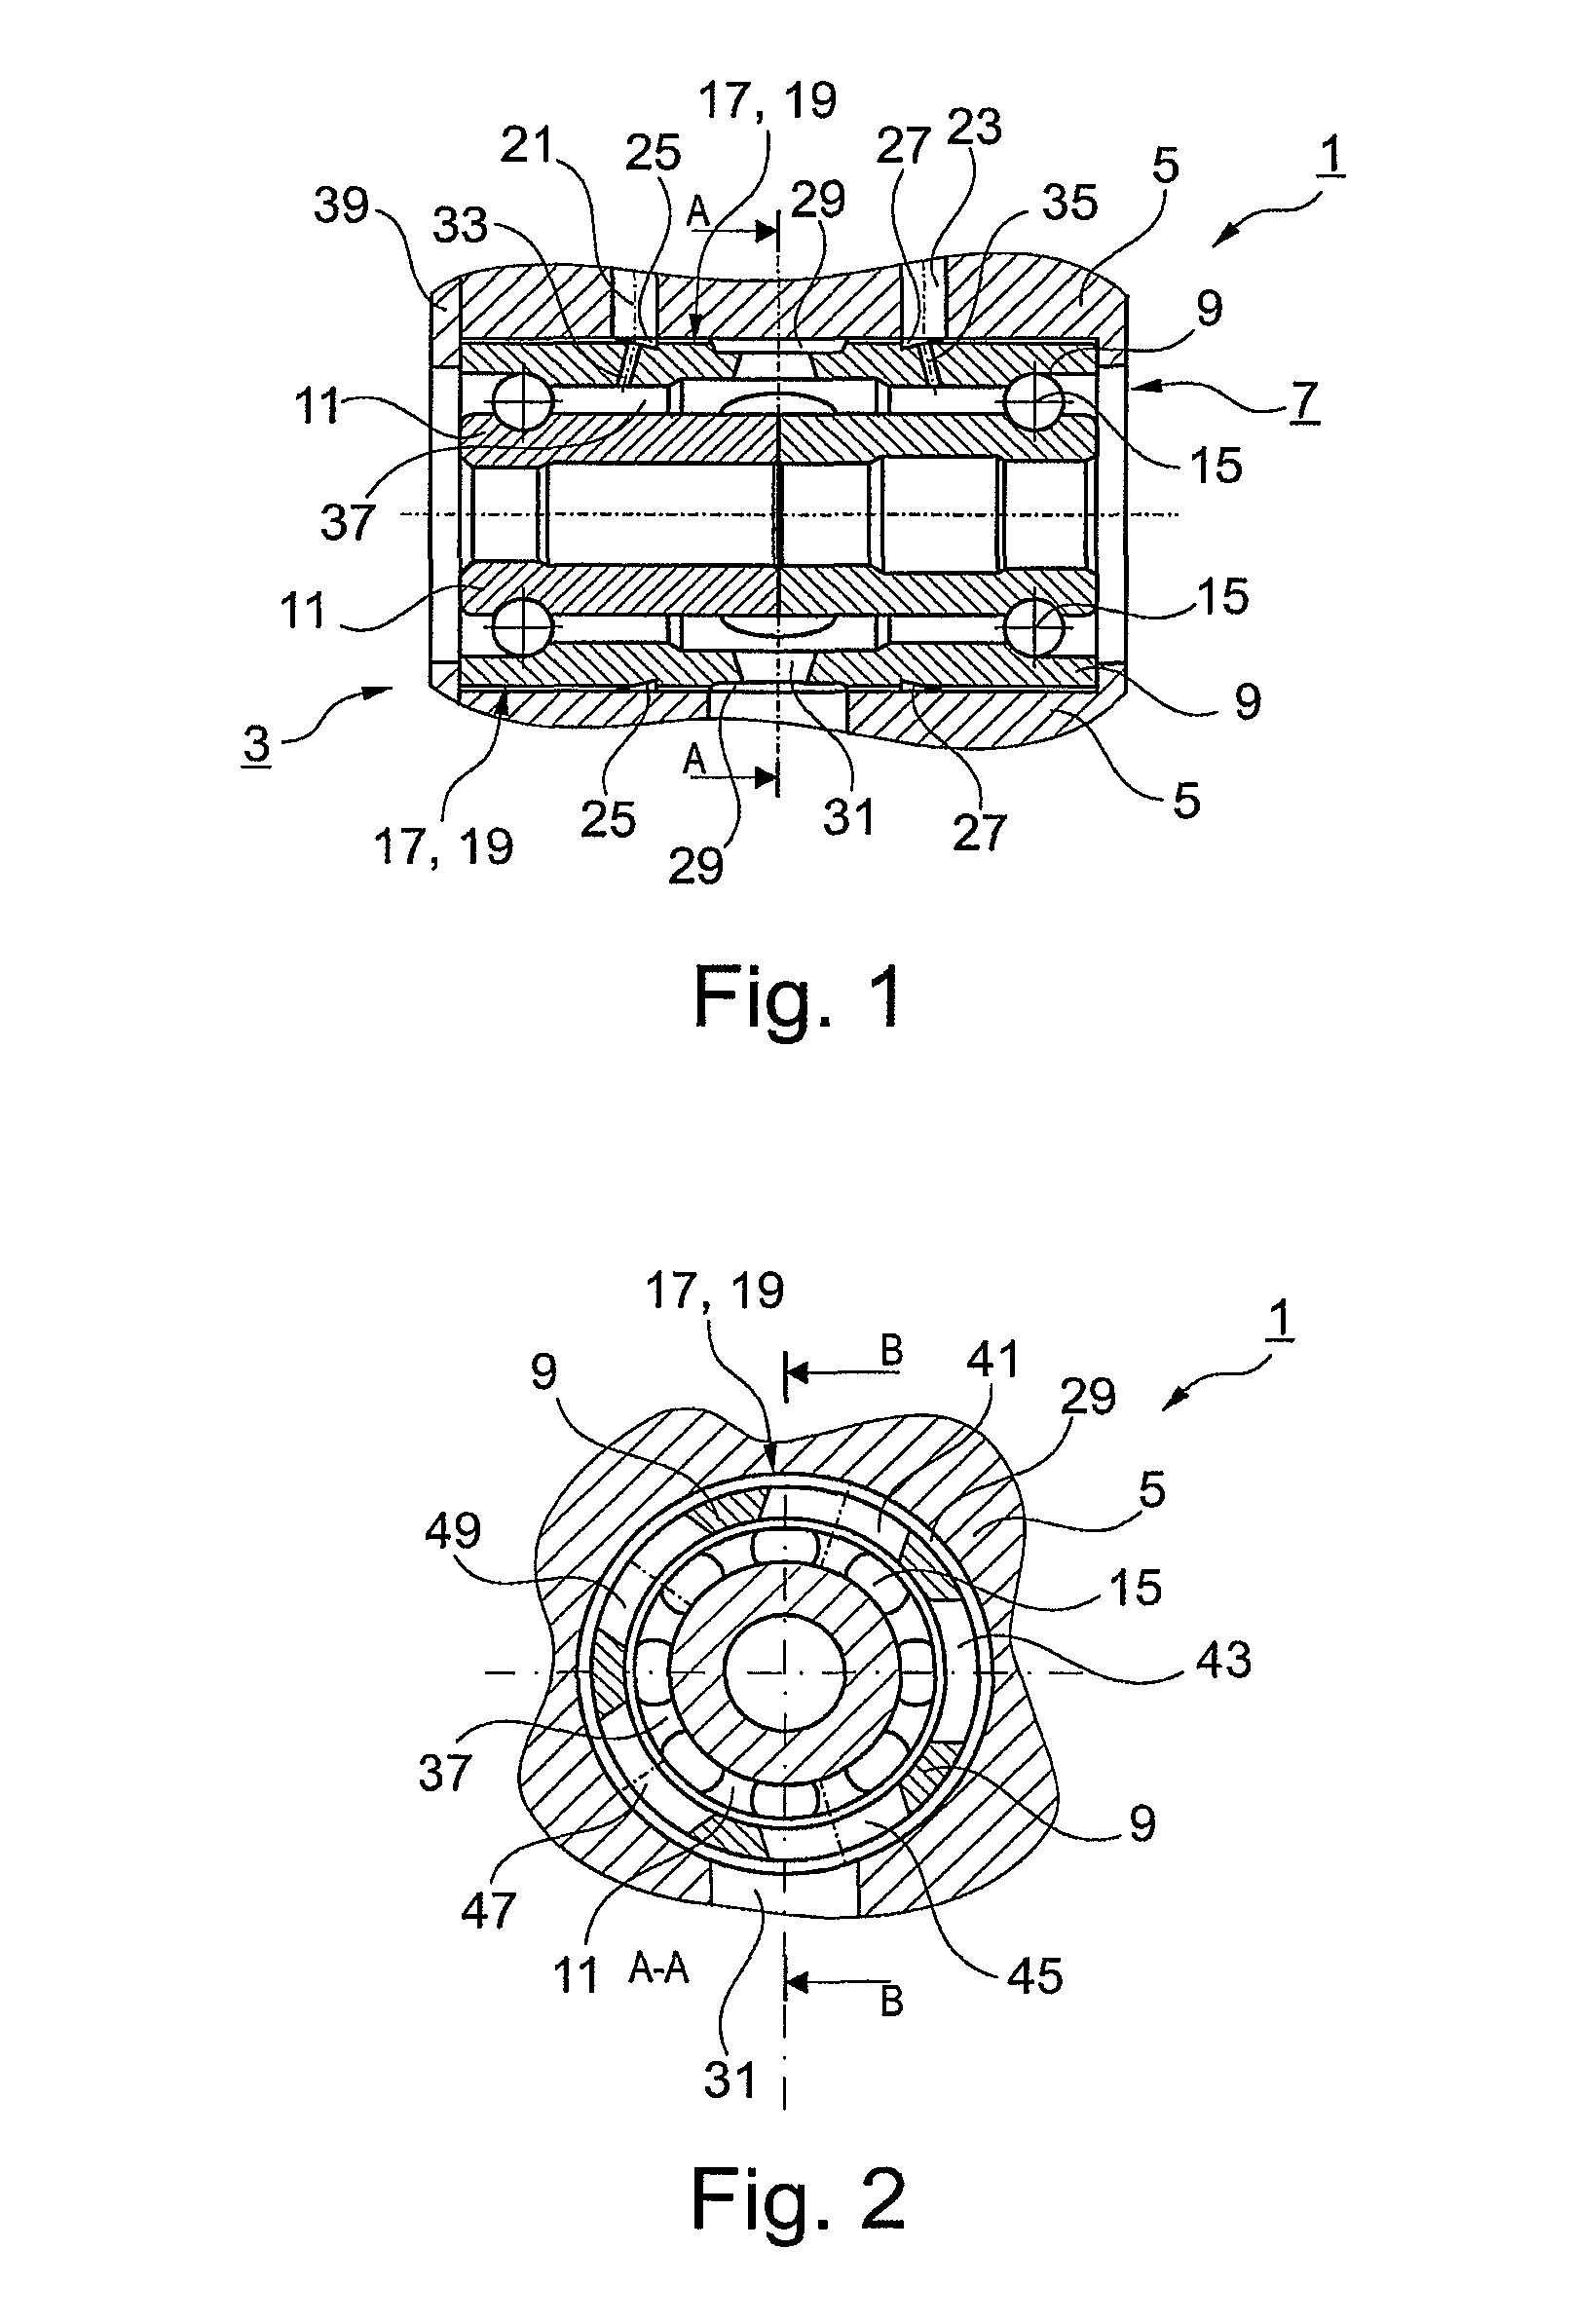 Bearing unit for a turbocharger